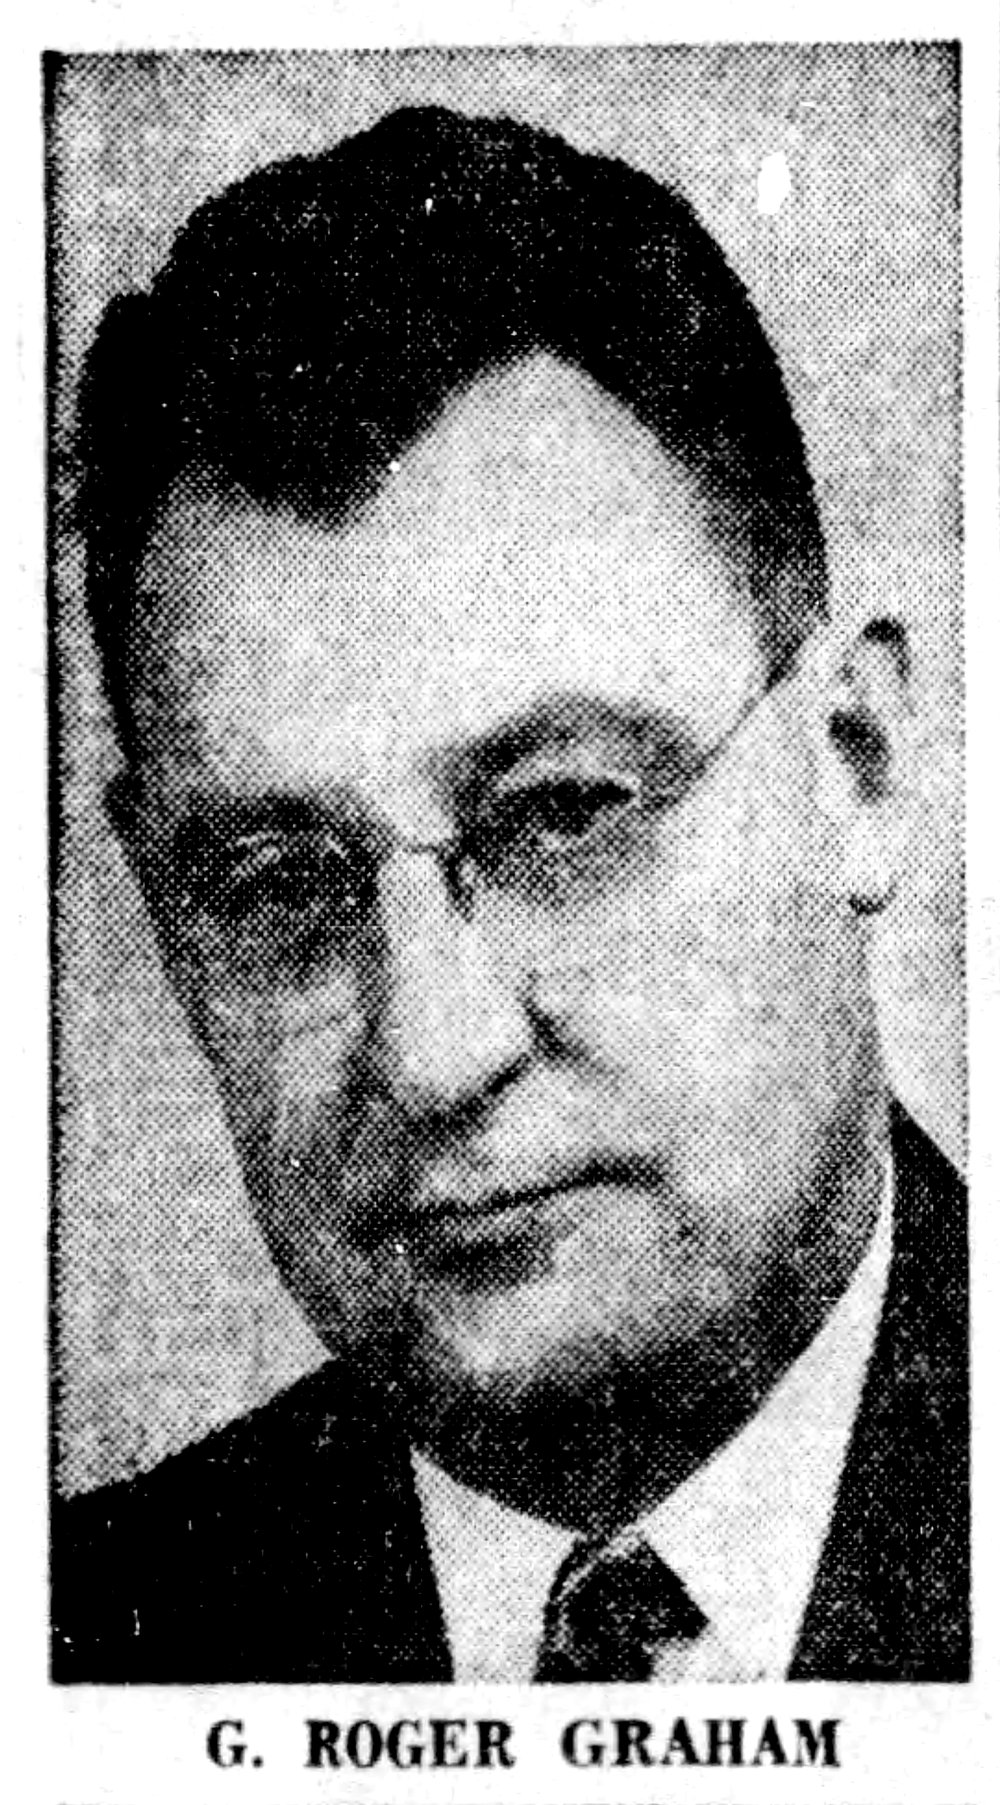  G. Roger Graham, Vice-Chairman of Canadian National’s Mountain Division and mastermind behind the C.N. Tower project, pictured here in 1960.   Edmonton Journal, November 7th, 1960.  